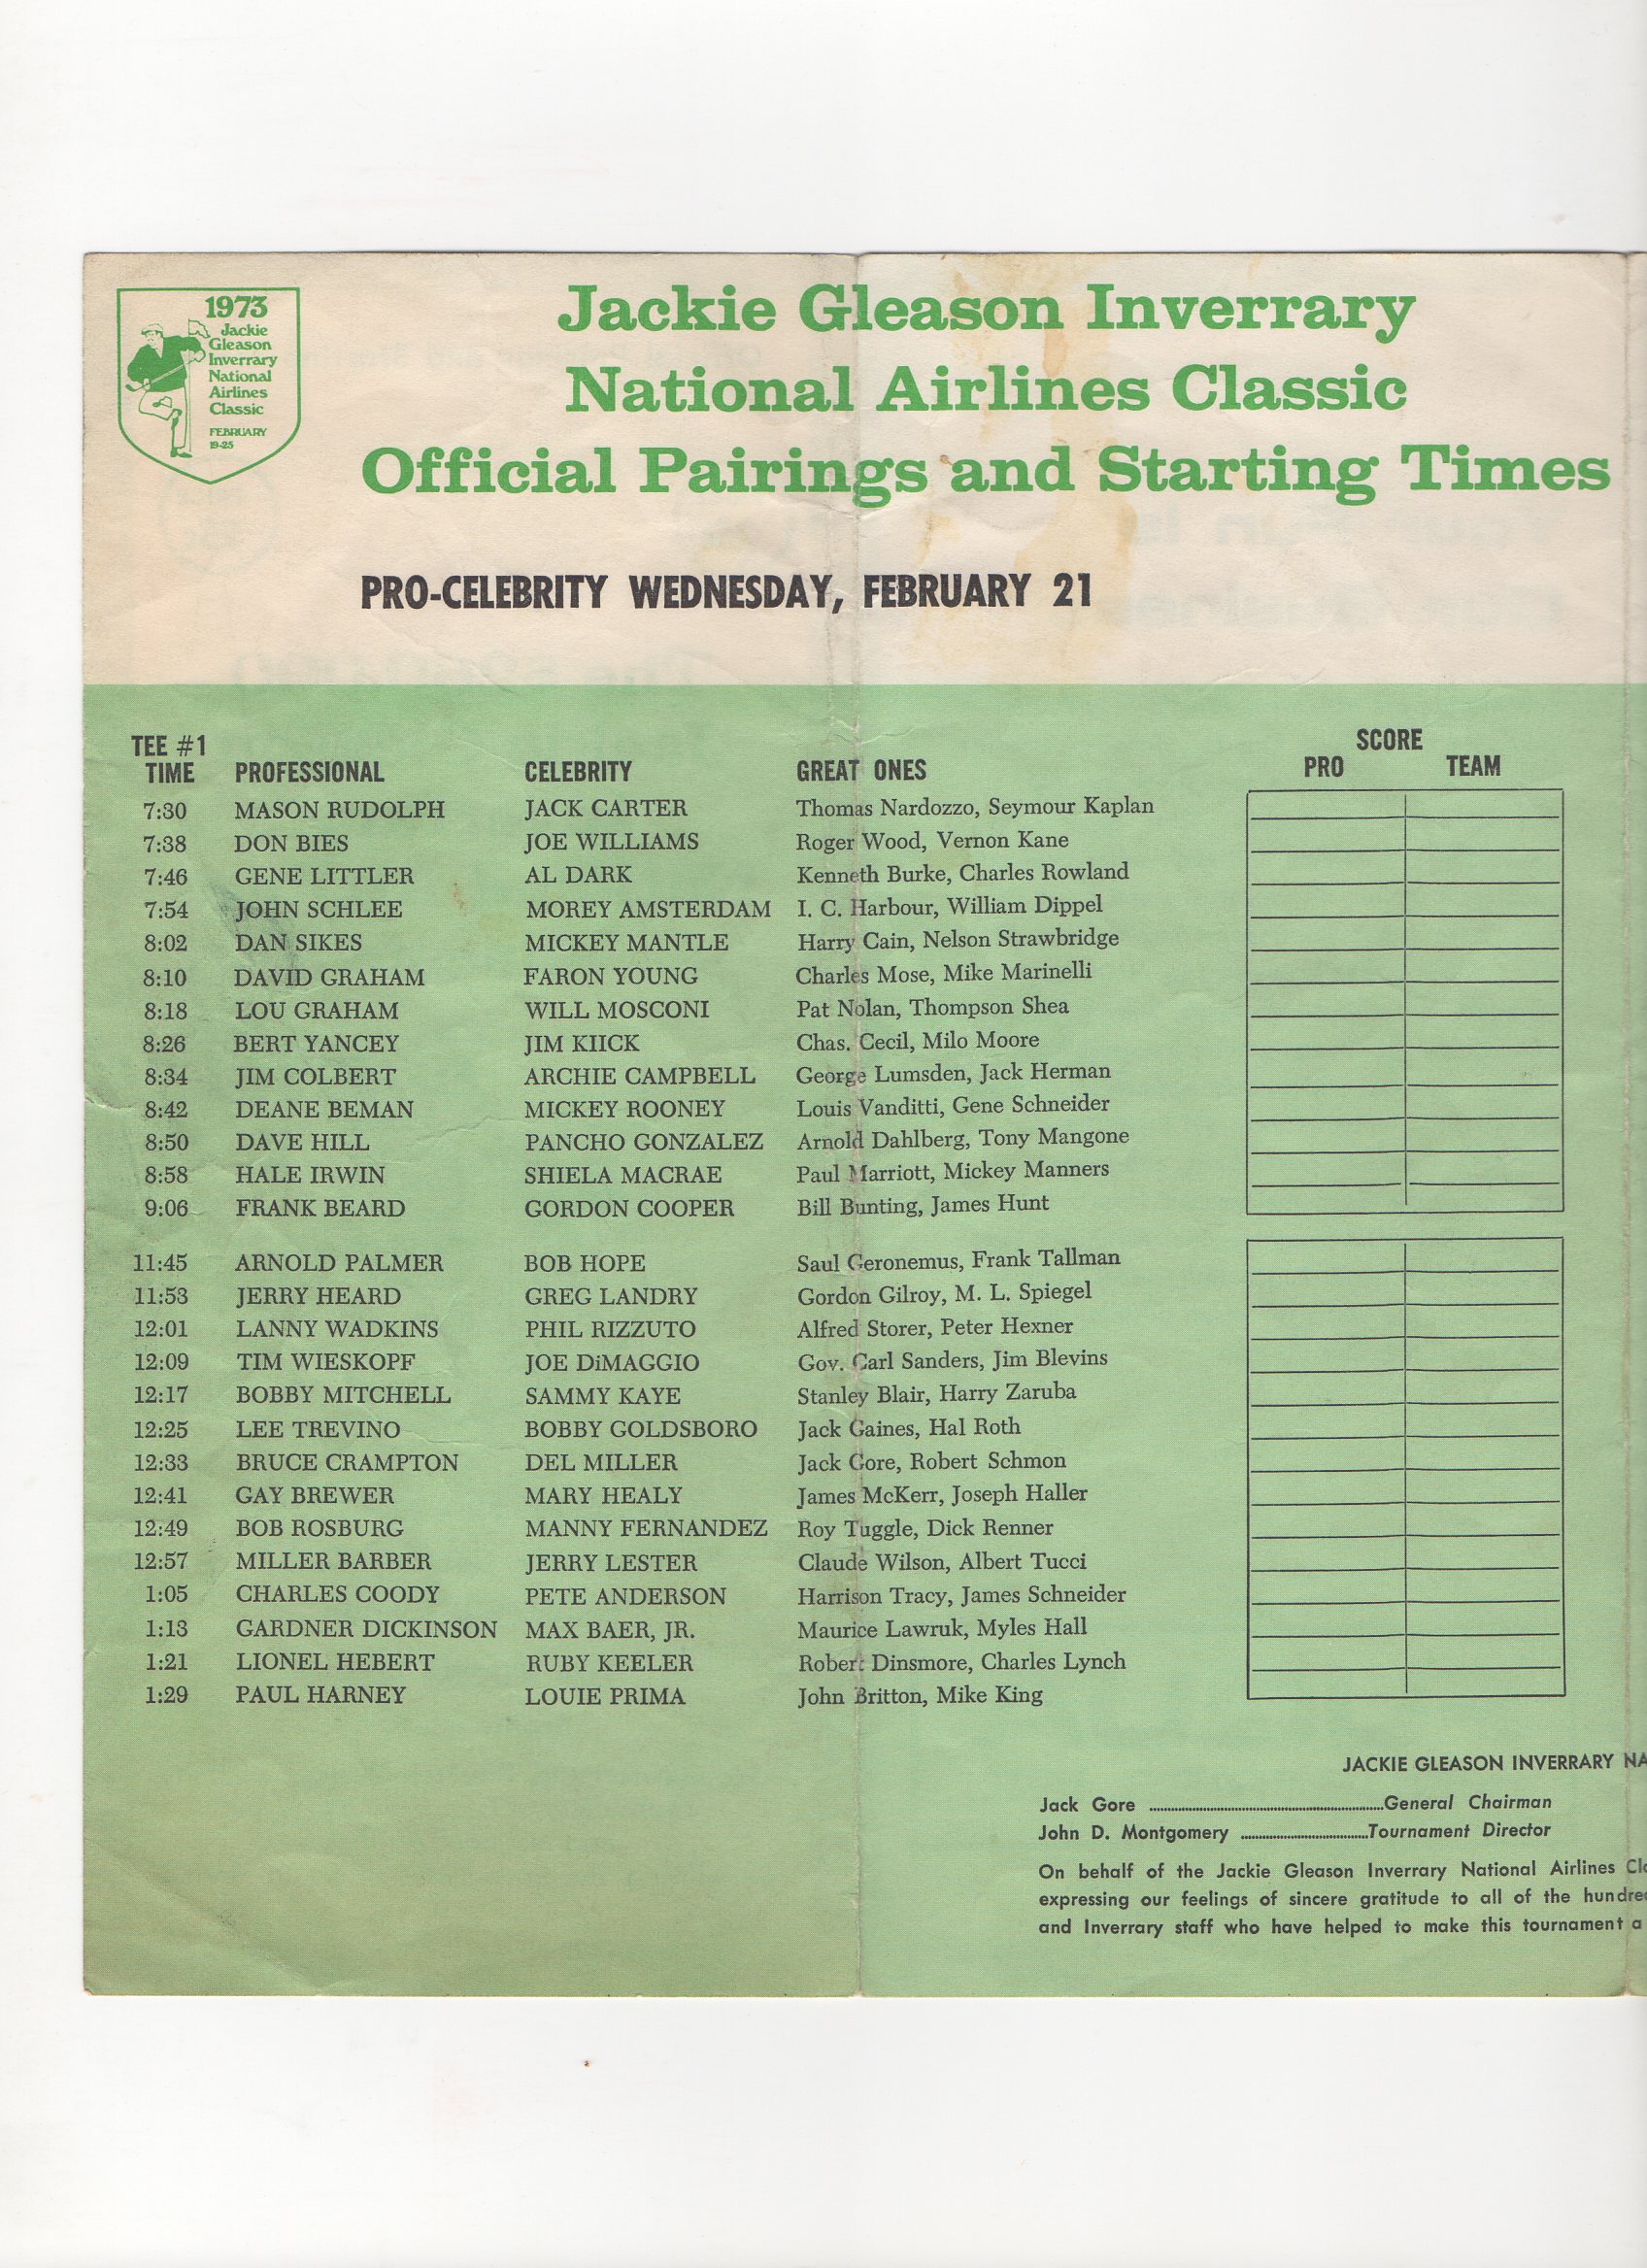 1972 jackie gleason inverrary national airlines classic